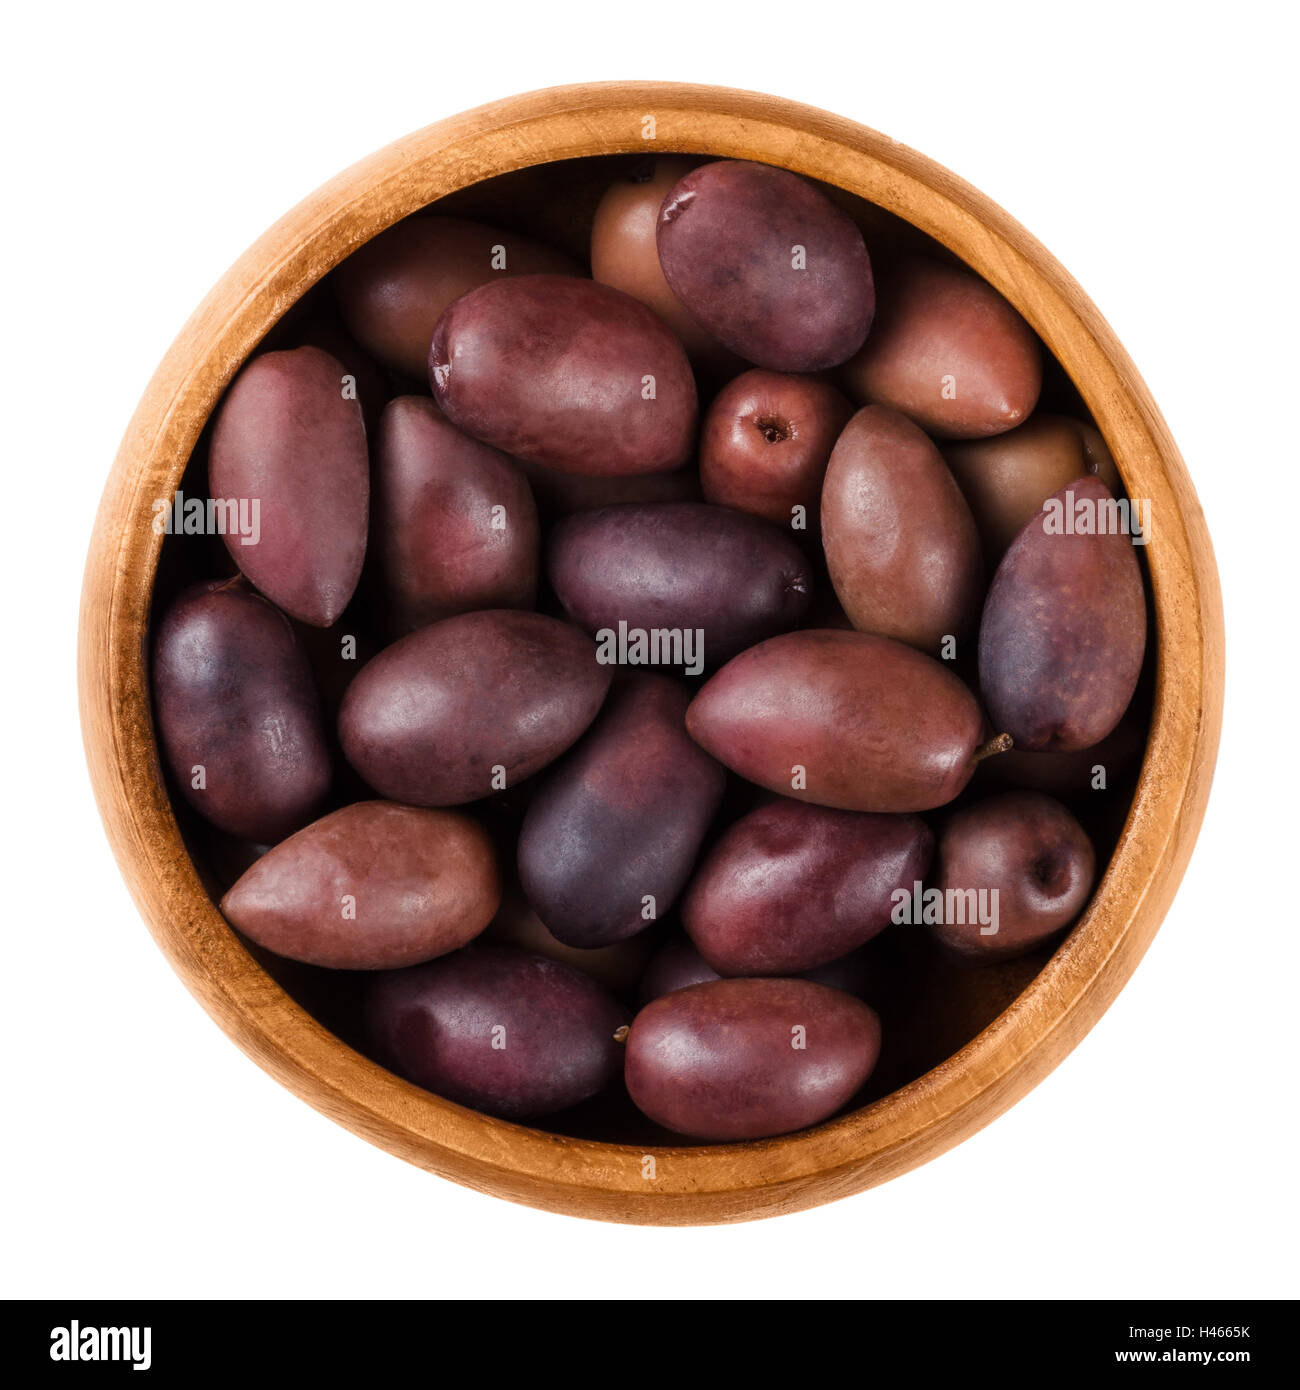 Kalamata black olives in a wooden bowl over white. Greek large purple table olives. A variety are called Kalamon olives. Stock Photo